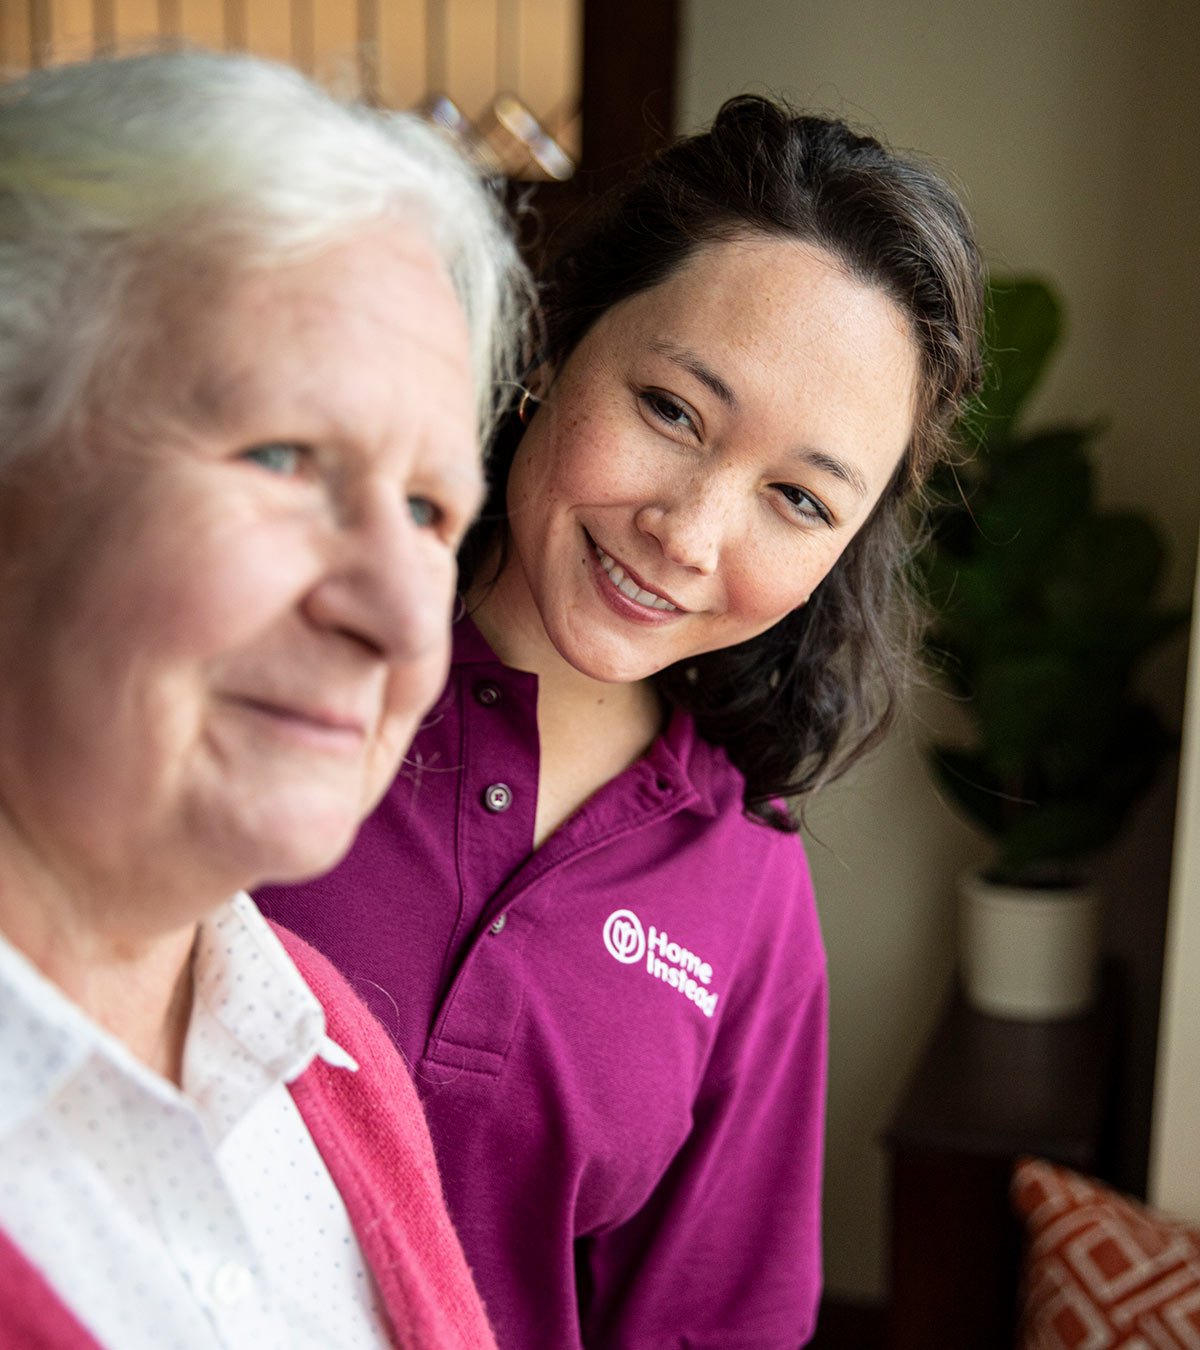 https://www.homeinstead.ca/siteassets/franchise/_1200x1350-home-page-photos/Home_Instead-CAREGiver-smiling-looking-at-senior.jpg